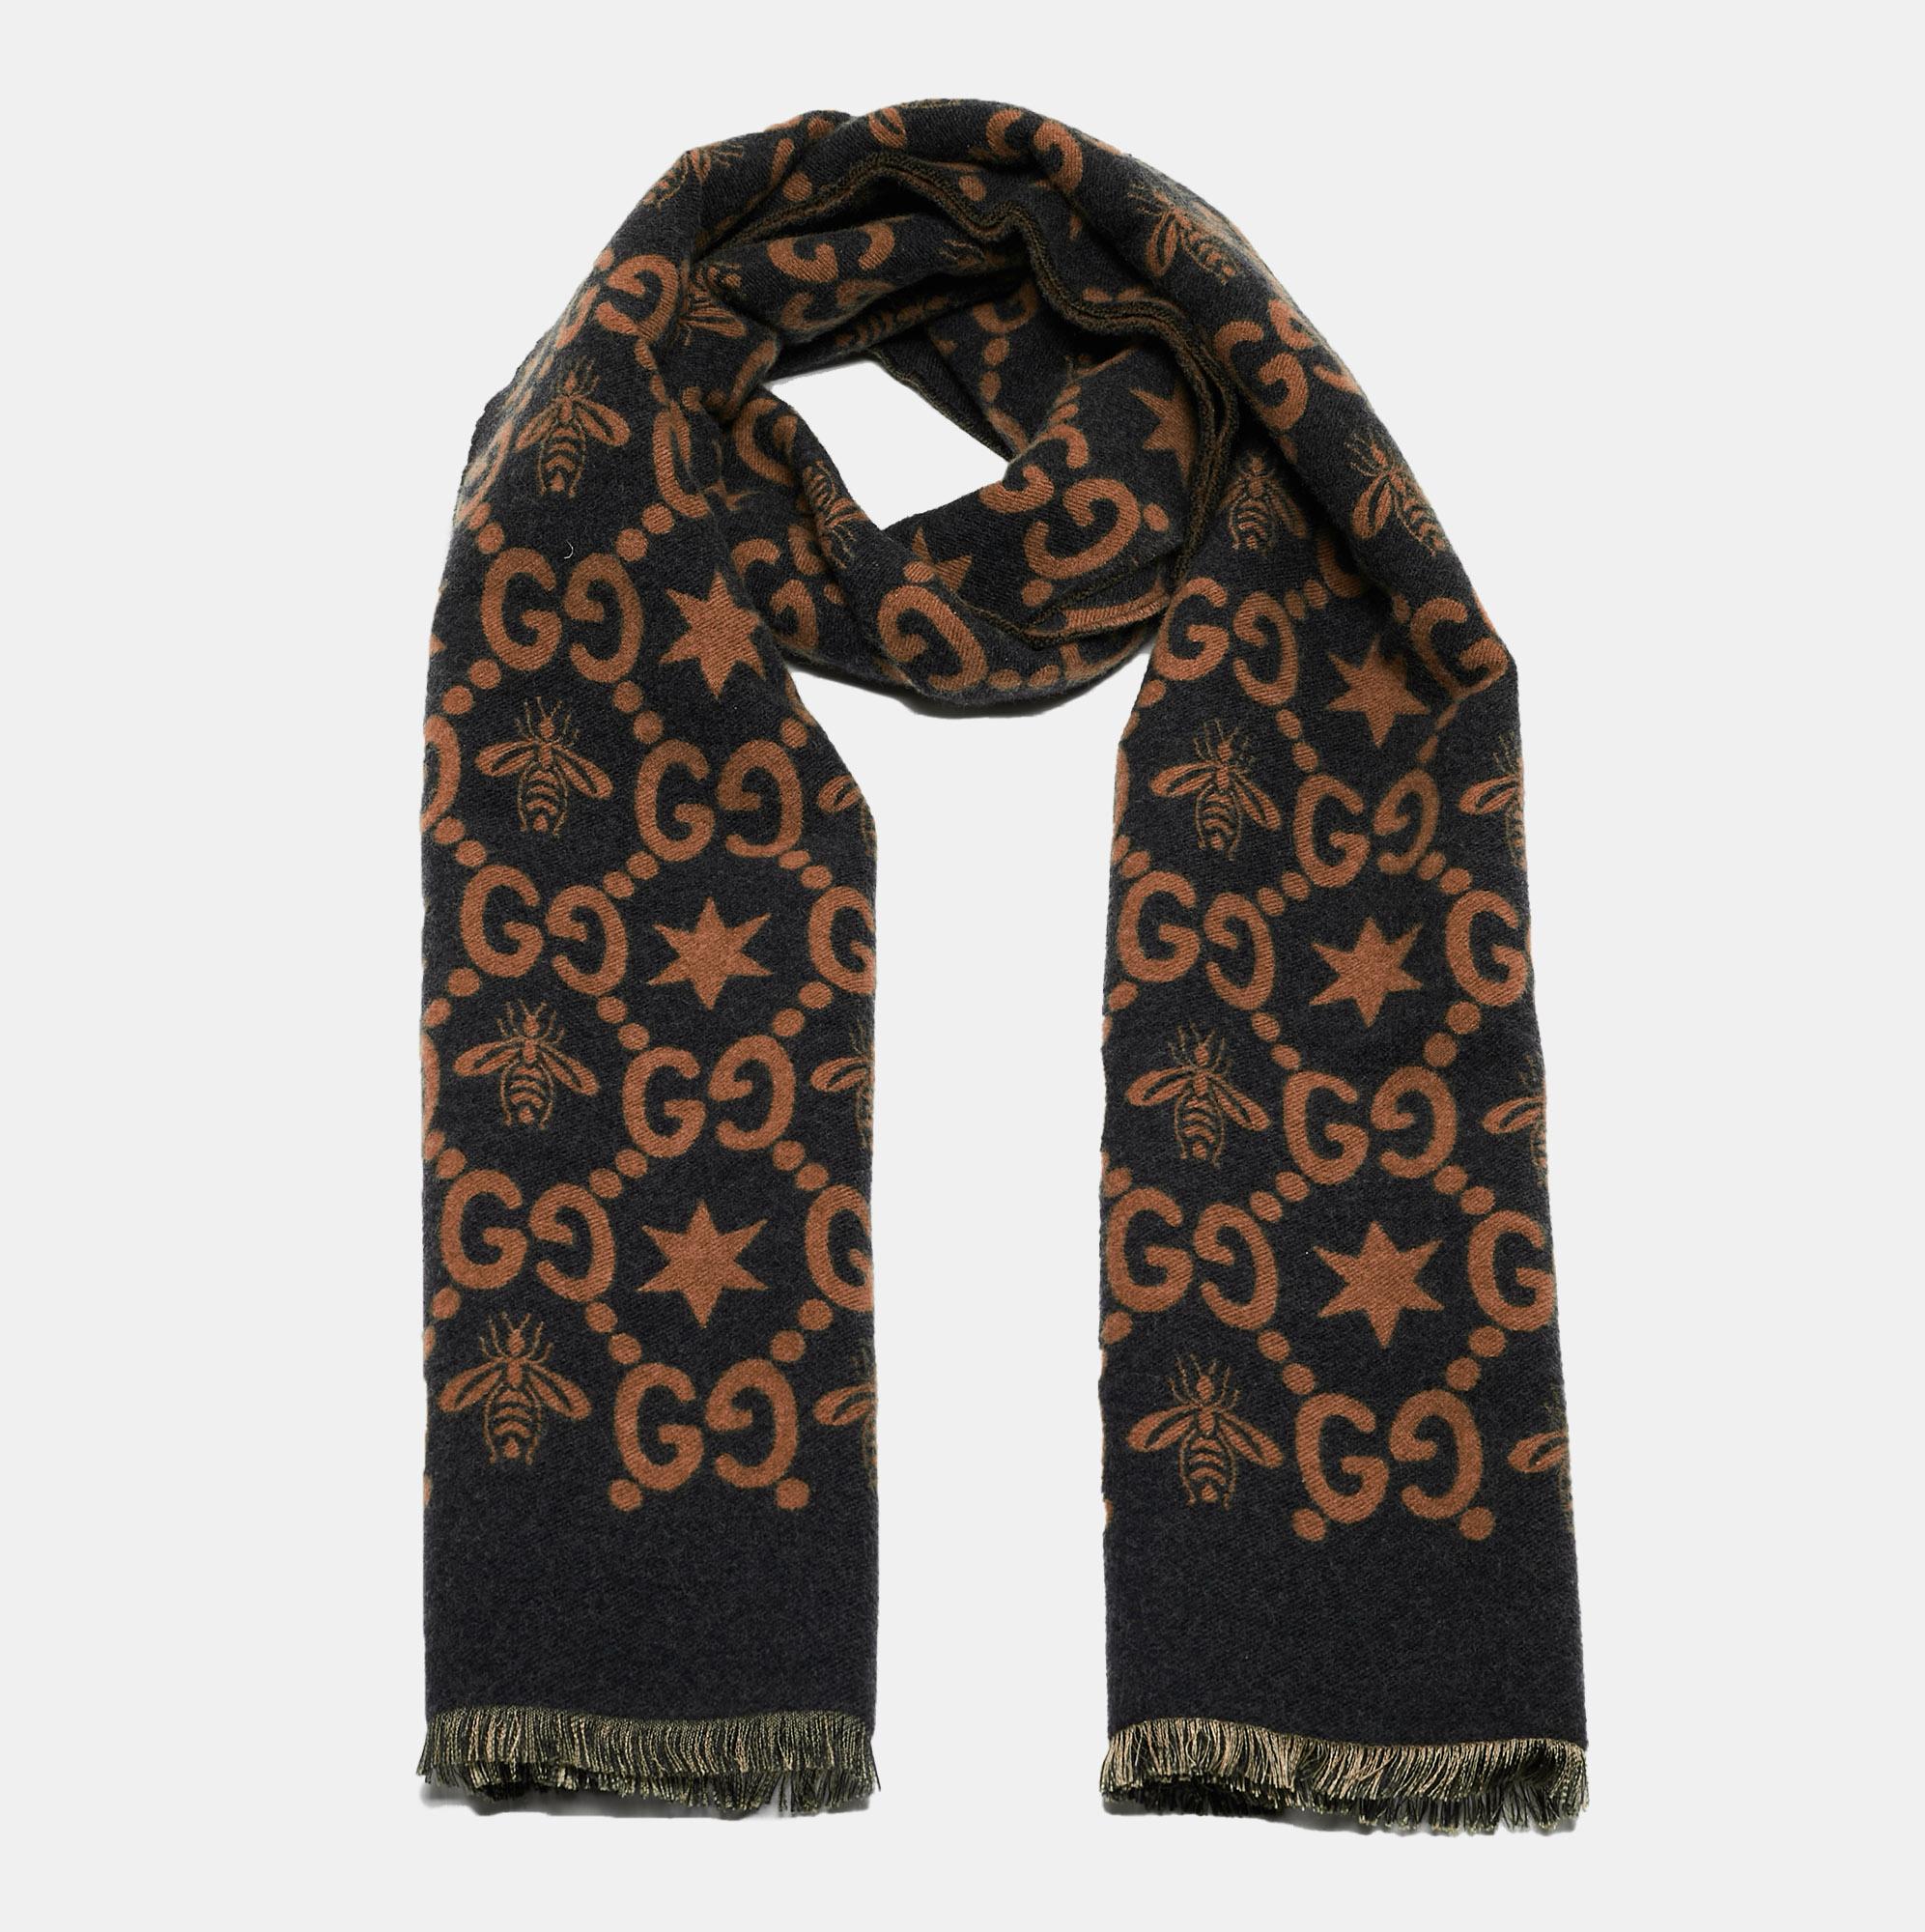 Let this scarf be the newest addition to your collection of accessories. It is stylish, durable, and handy! Designed by Gucci, you can use this creation with a variety of outfits.

